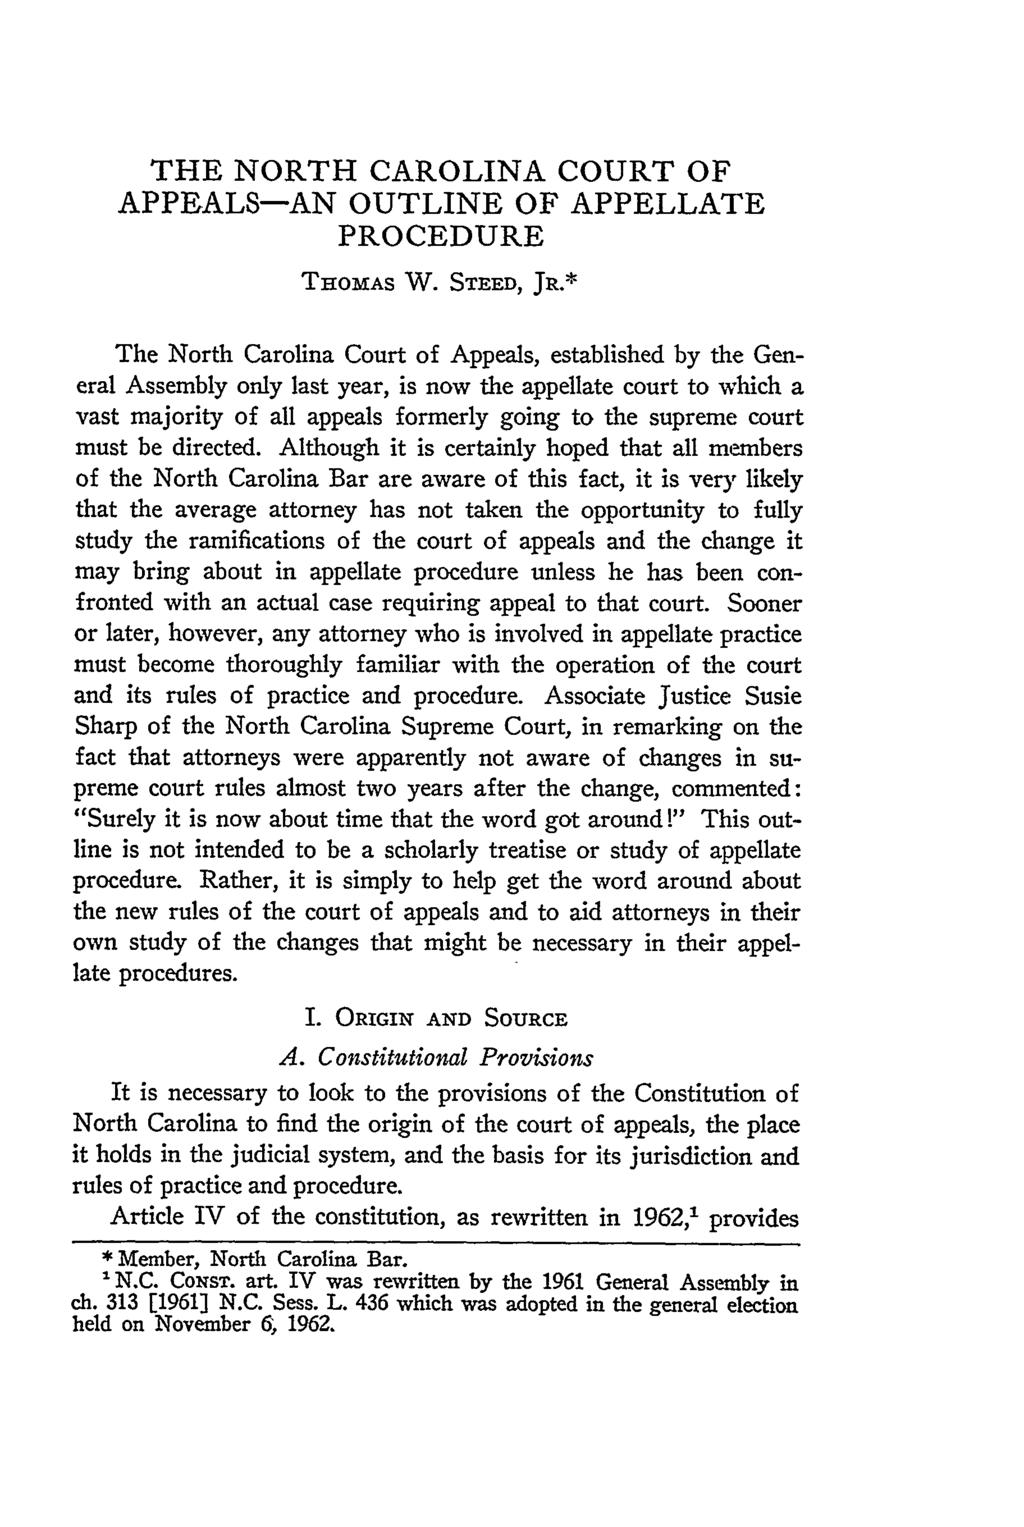 THE NORTH CAROLINA COURT OF APPEALS-AN OUTLINE OF APPELLATE PROCEDURE THOMAS W. STEED, JR.